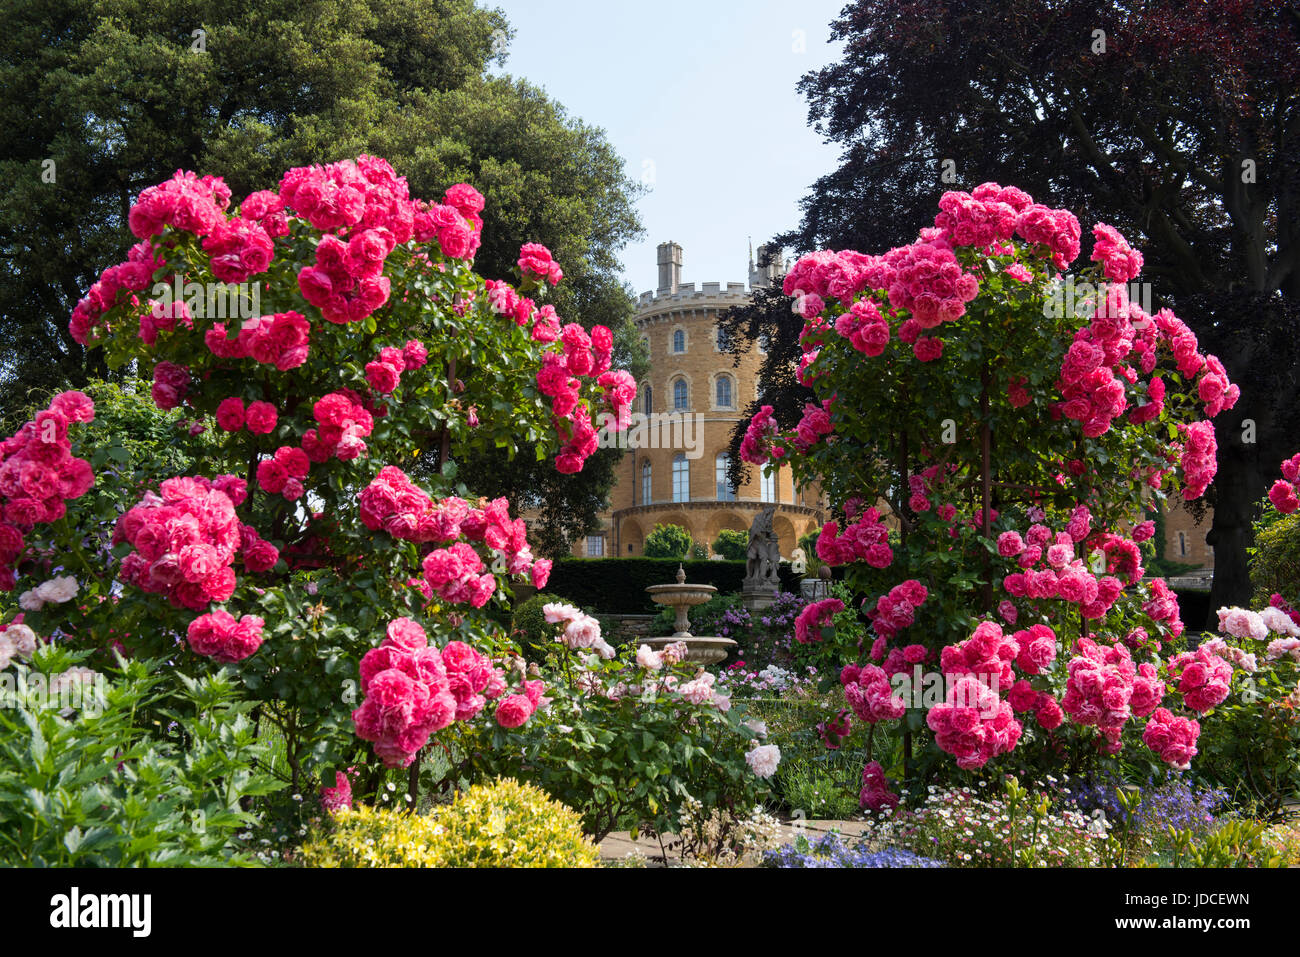 A view of Belvoir Castle through the pretty flowers in the Rose Garden, Leicestershire England UK Stock Photo